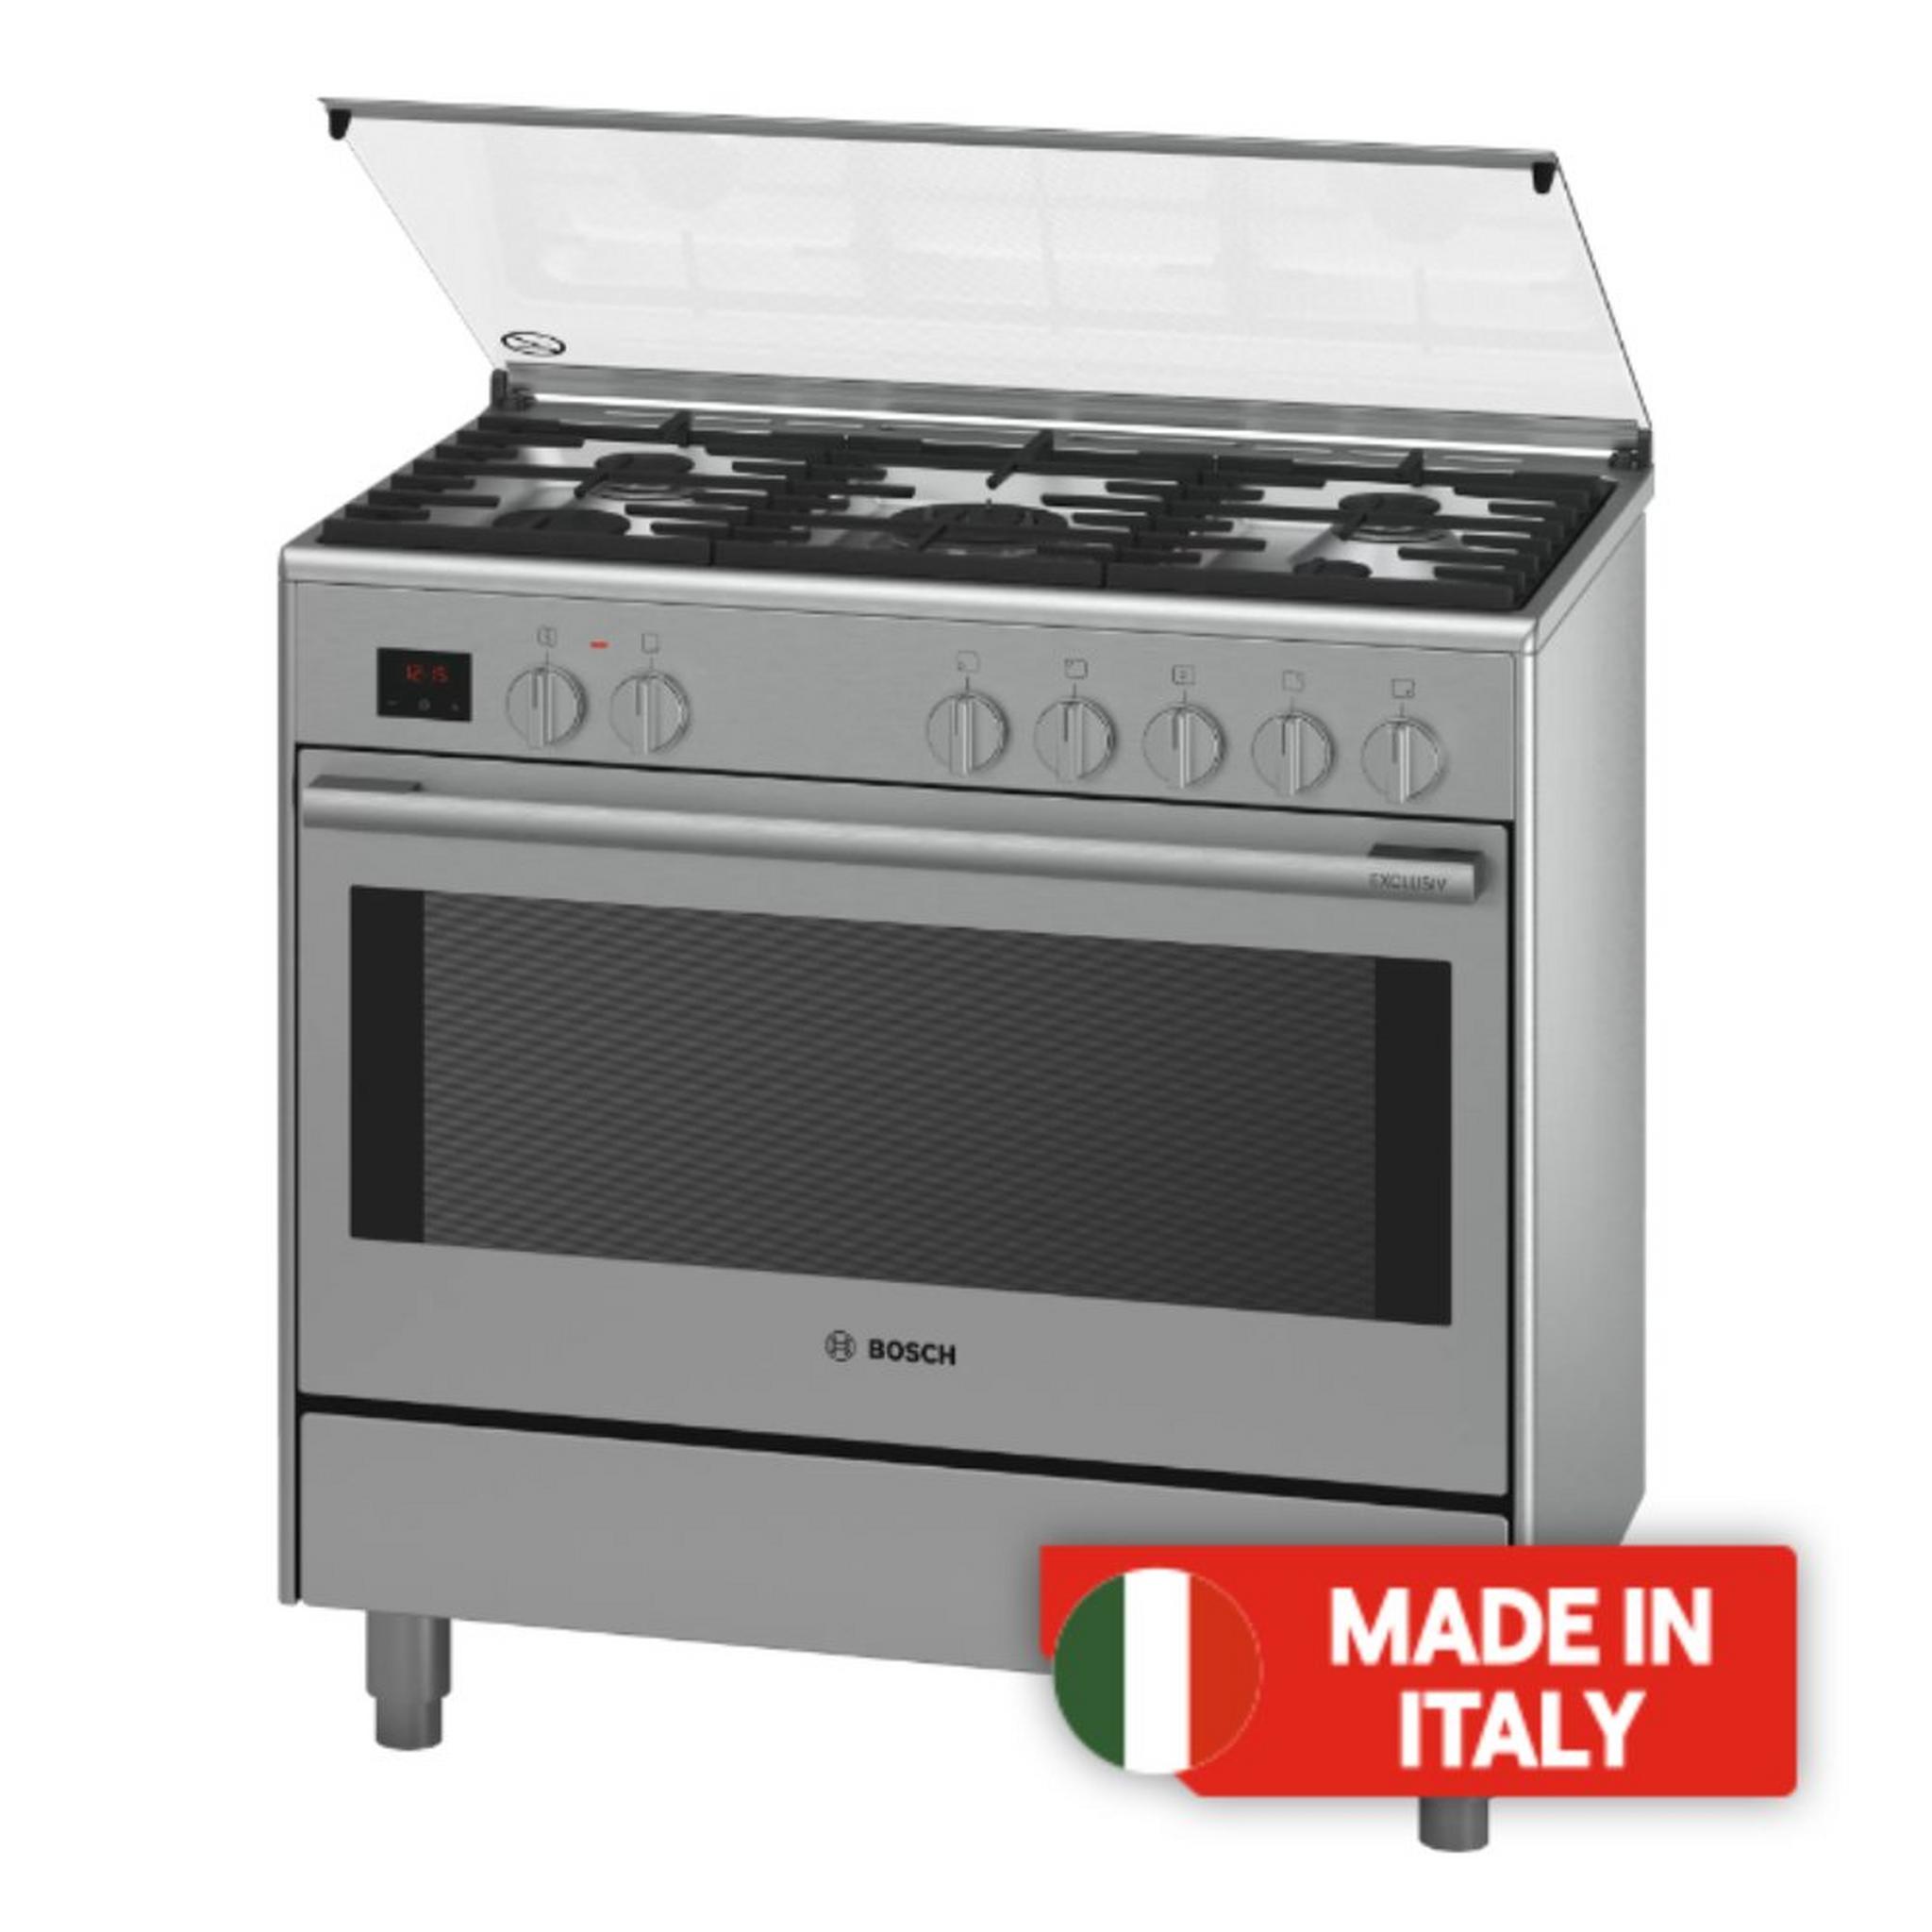 Bosch Series 8 5 Burners Dual fuel Cooker, 90X60cm, HSB738357M - Stainless Steel